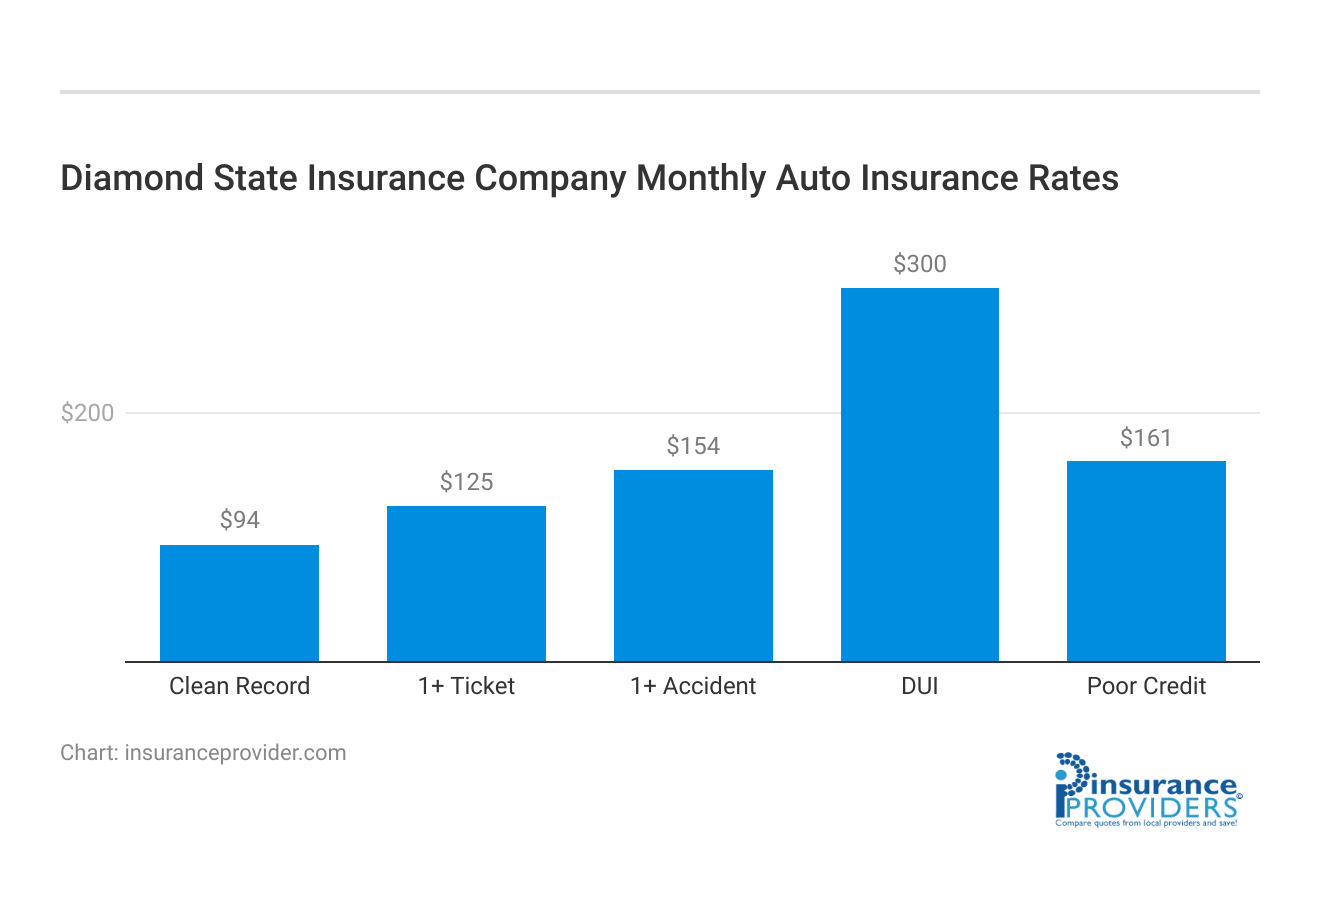 <h3>Diamond State Insurance Company Monthly Auto Insurance Rates</h3>